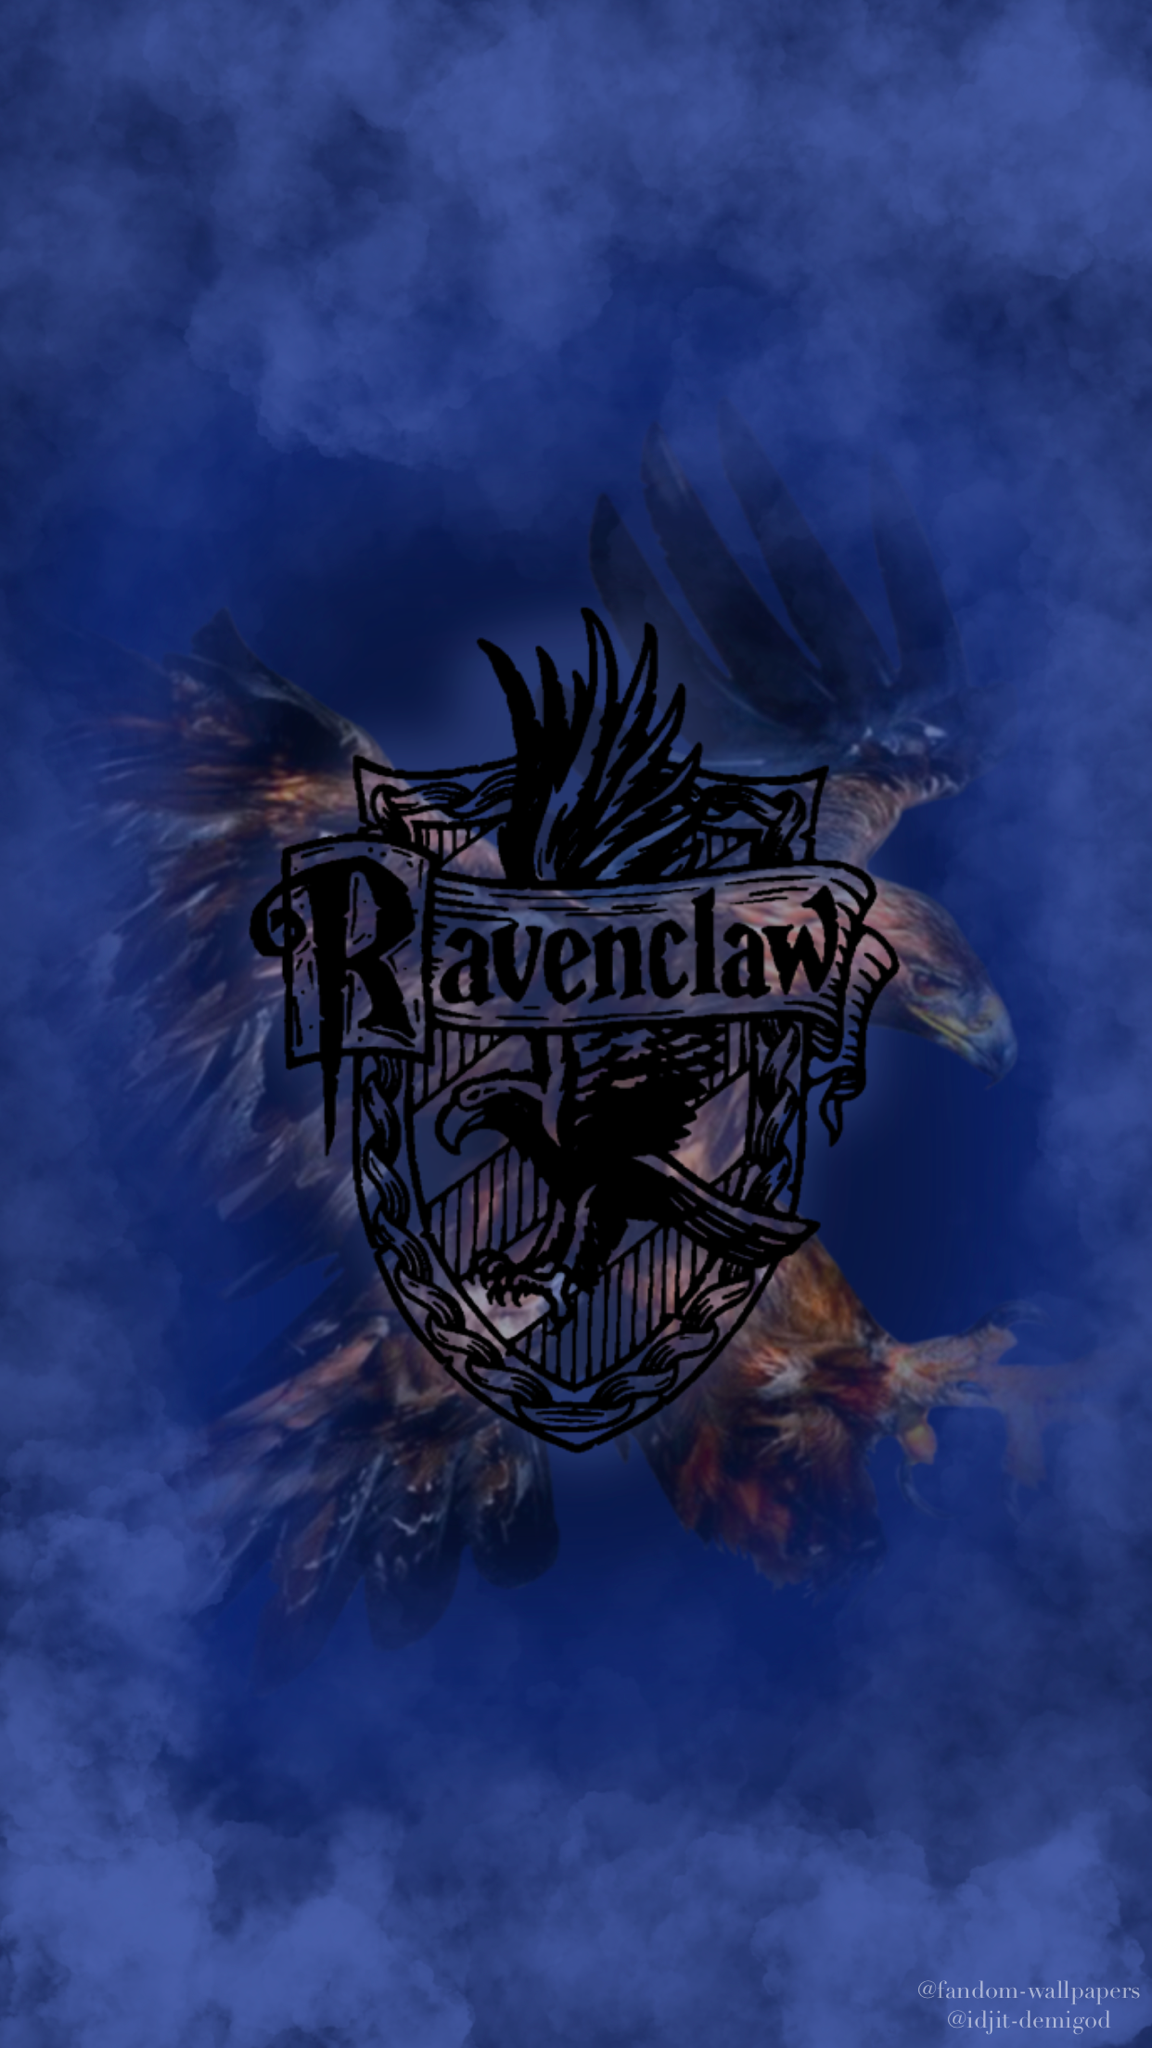 Harry Potter Ravenclaw Eagle Wallpapers  Ravenclaw Wallpaper iPhone